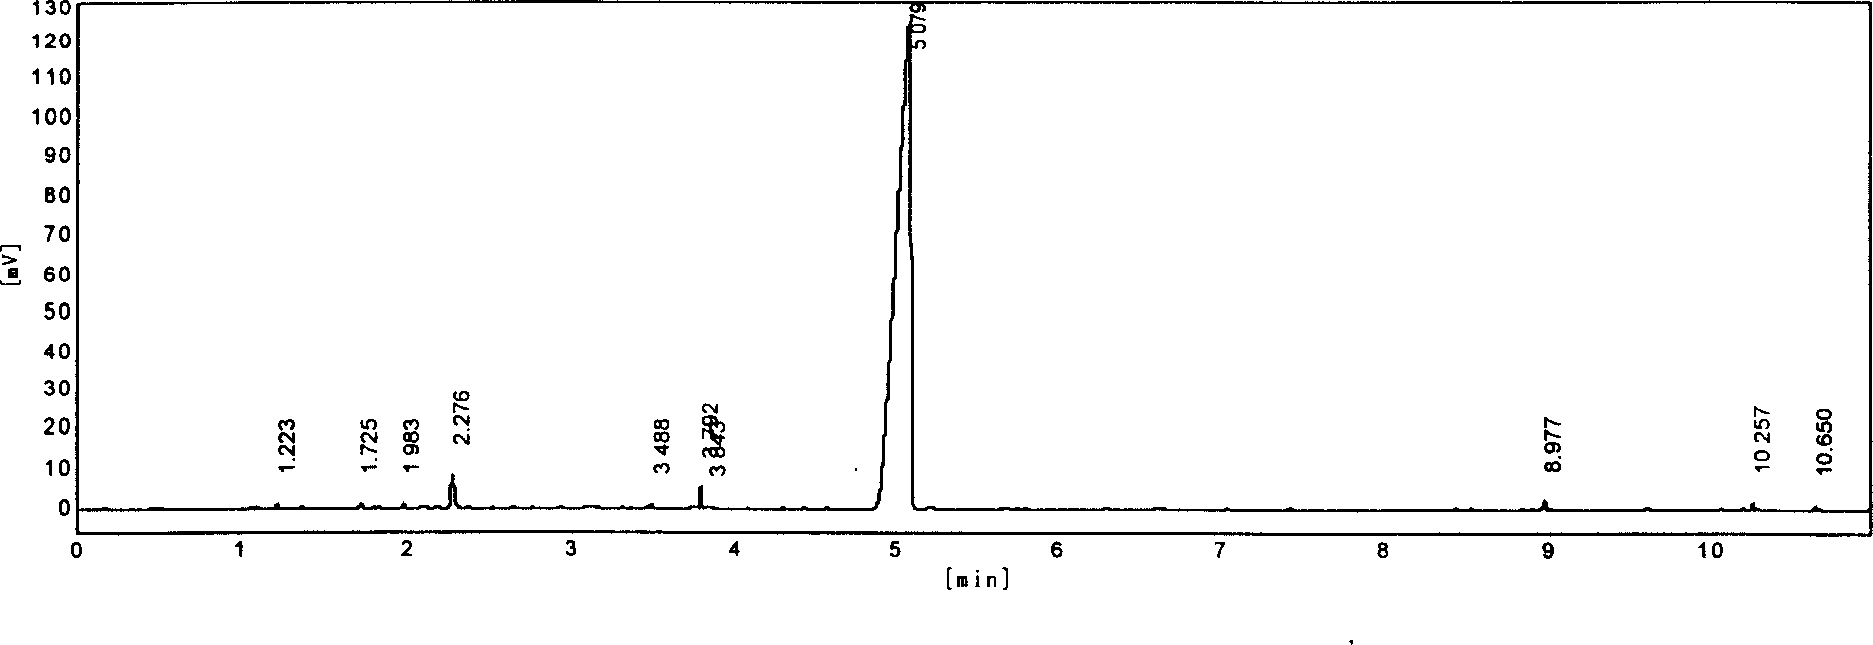 Method for extracting 2 - ethyl hexenal in polyvinyl butyral acetal, and measuring content